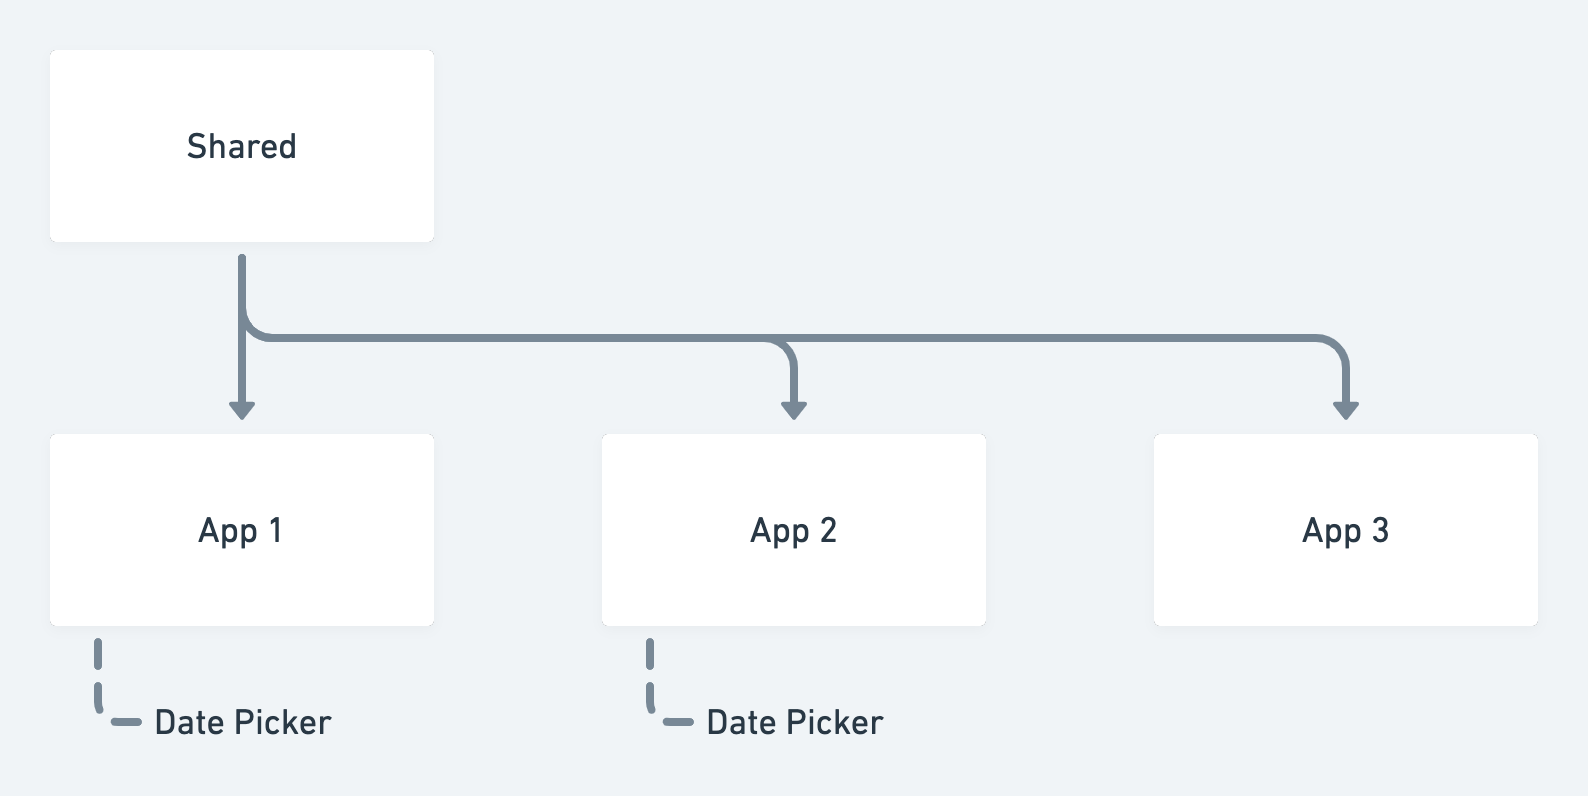 Implementations of date picker component in the applications